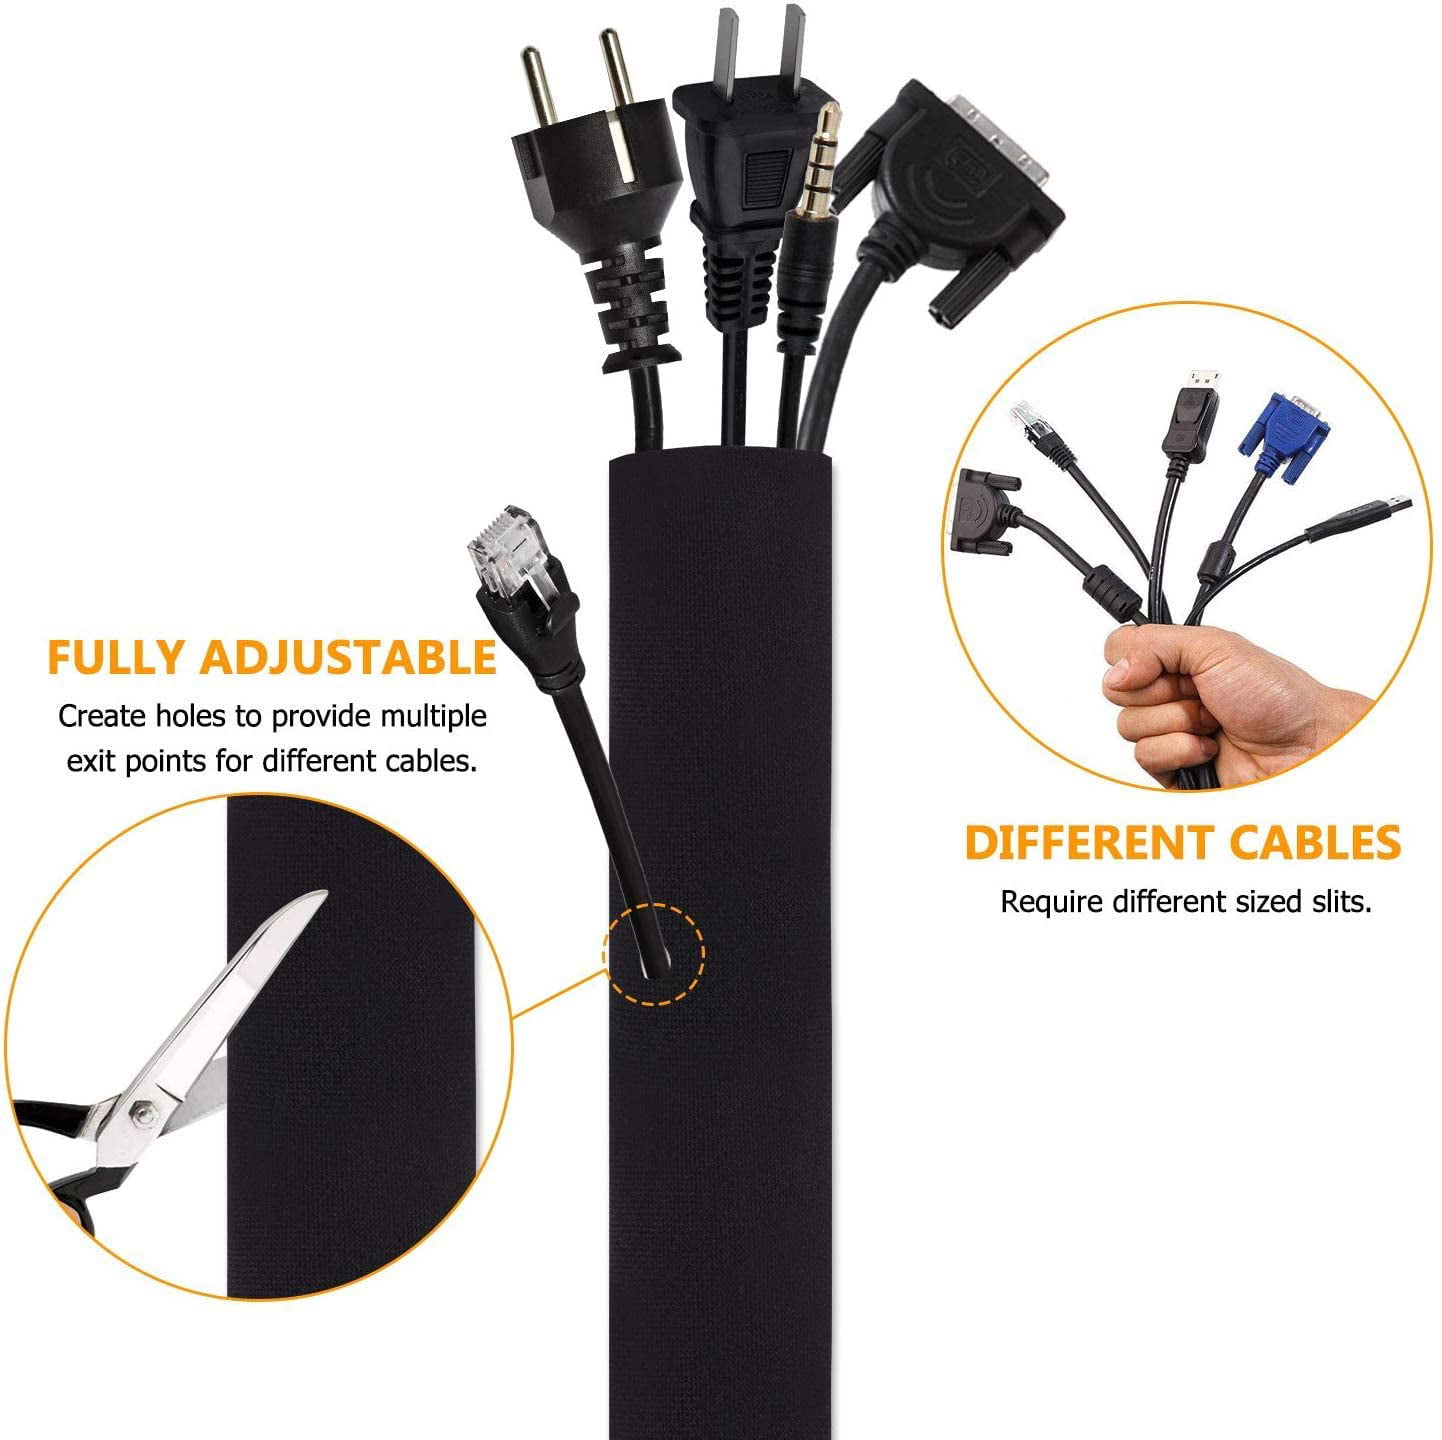 Skycase Cable Sleeves,[4 Pack] Flexible Cable Management  Sleeves,[Waterproof][Buckles Design] 19.5 inch Wire Cover Cord Organizer  System with Zipper for TV,Computer,Office,Home Entertainment,Black 